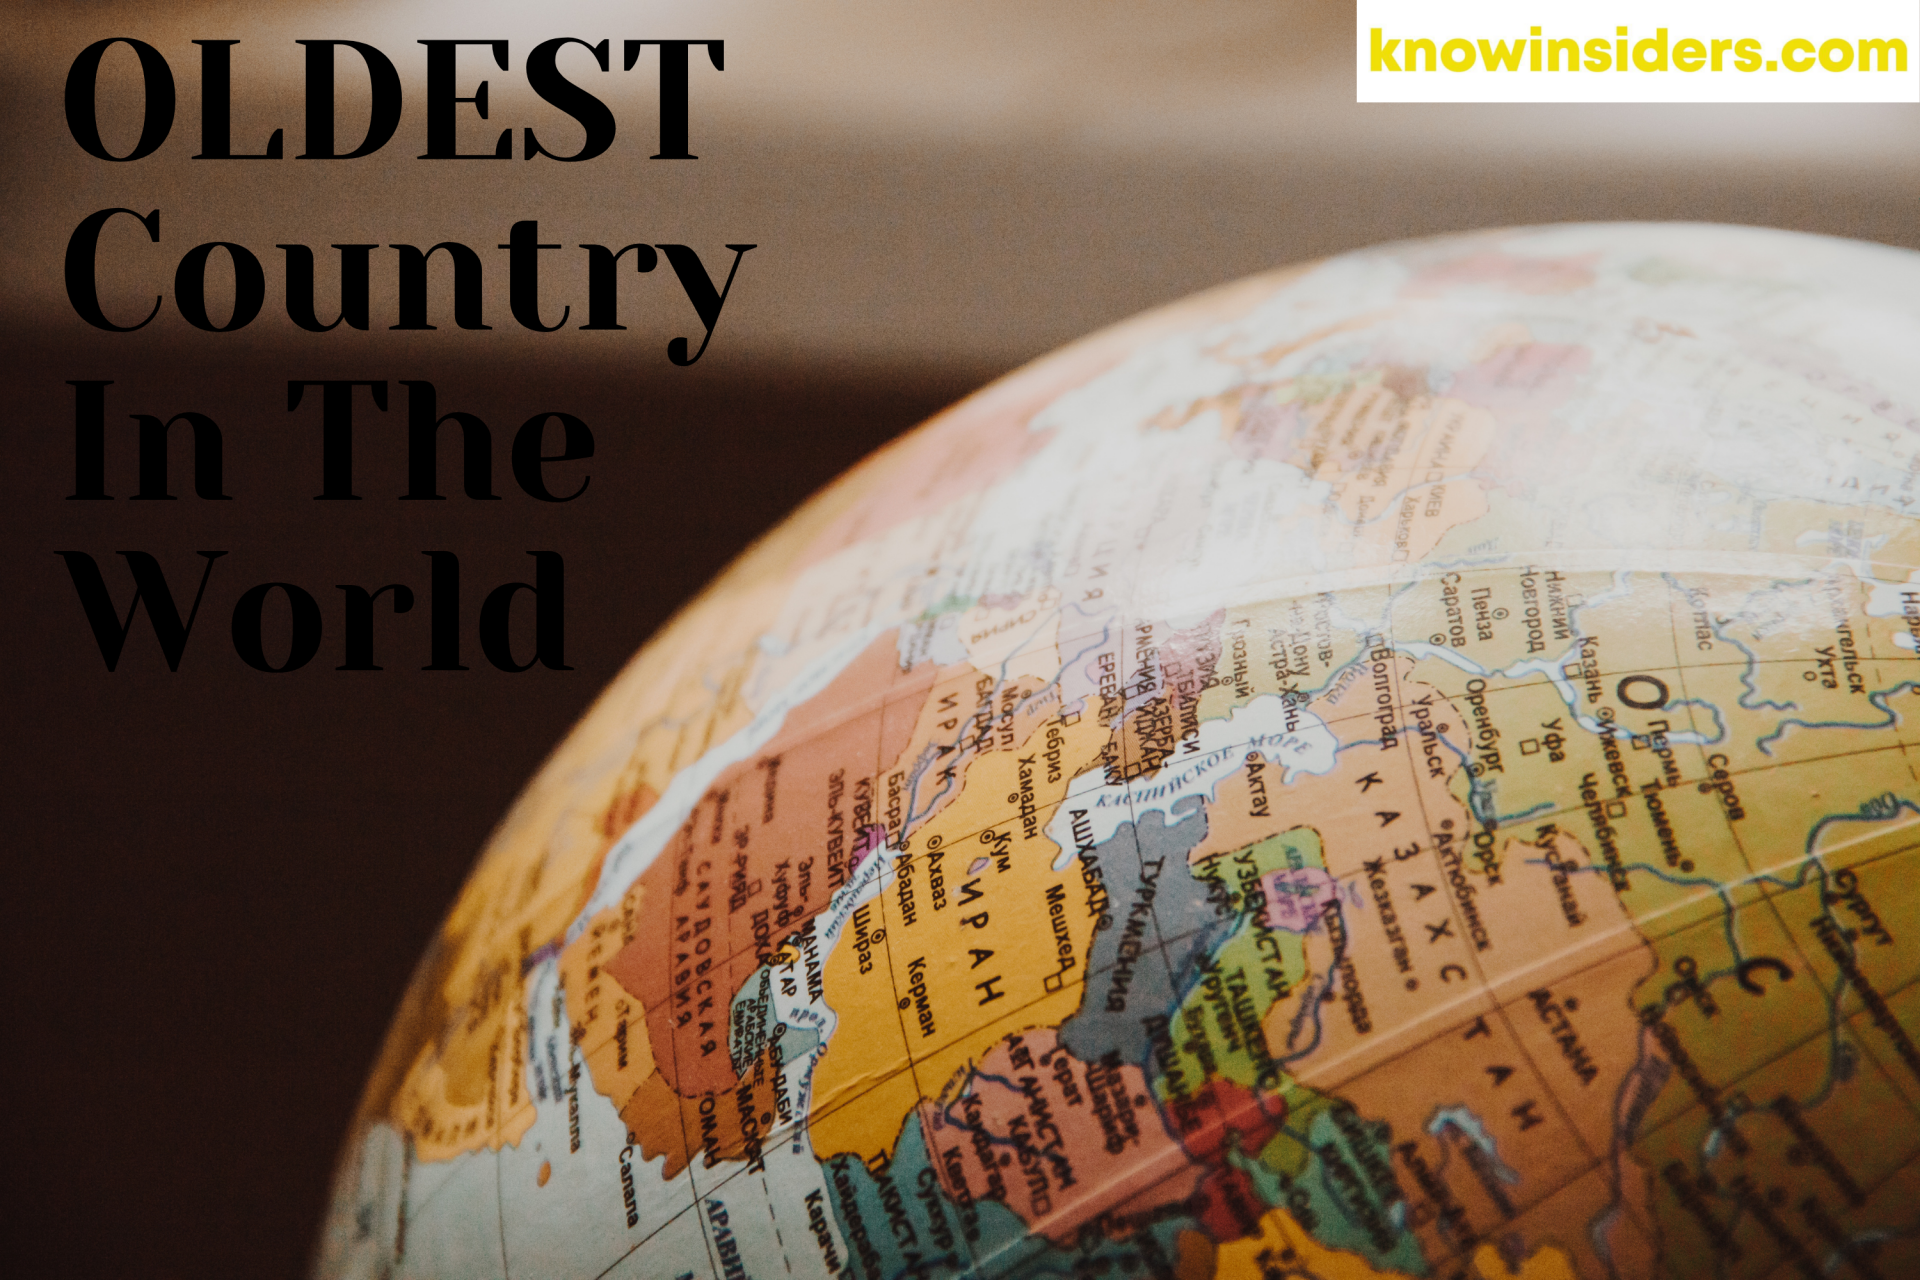 What is The Oldest Country in the World?